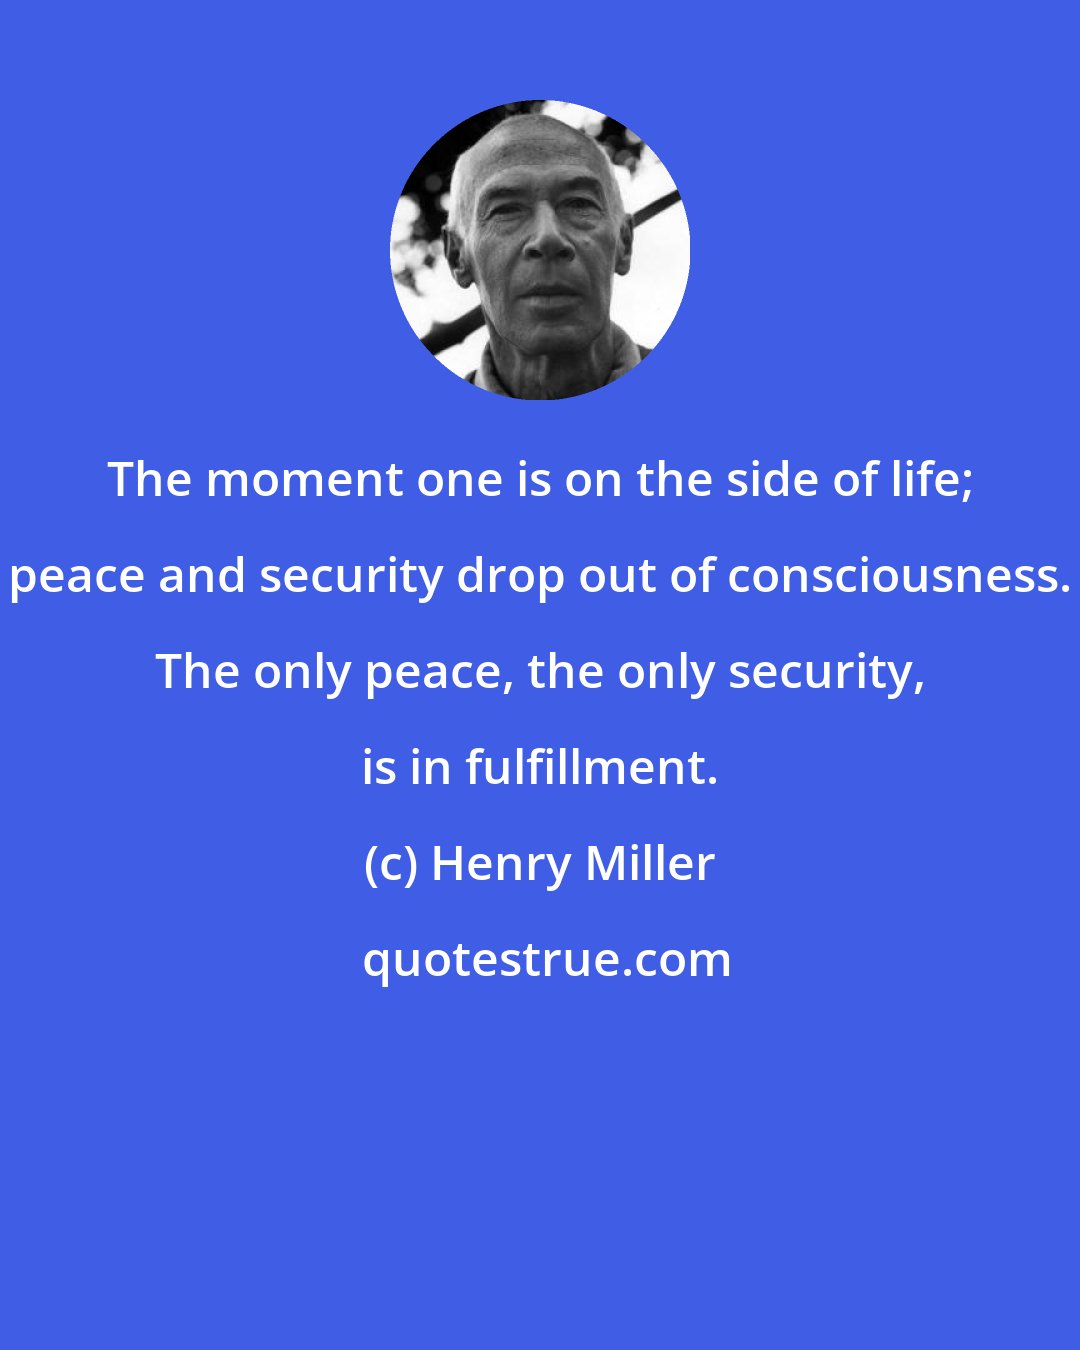 Henry Miller: The moment one is on the side of life; peace and security drop out of consciousness. The only peace, the only security, is in fulfillment.